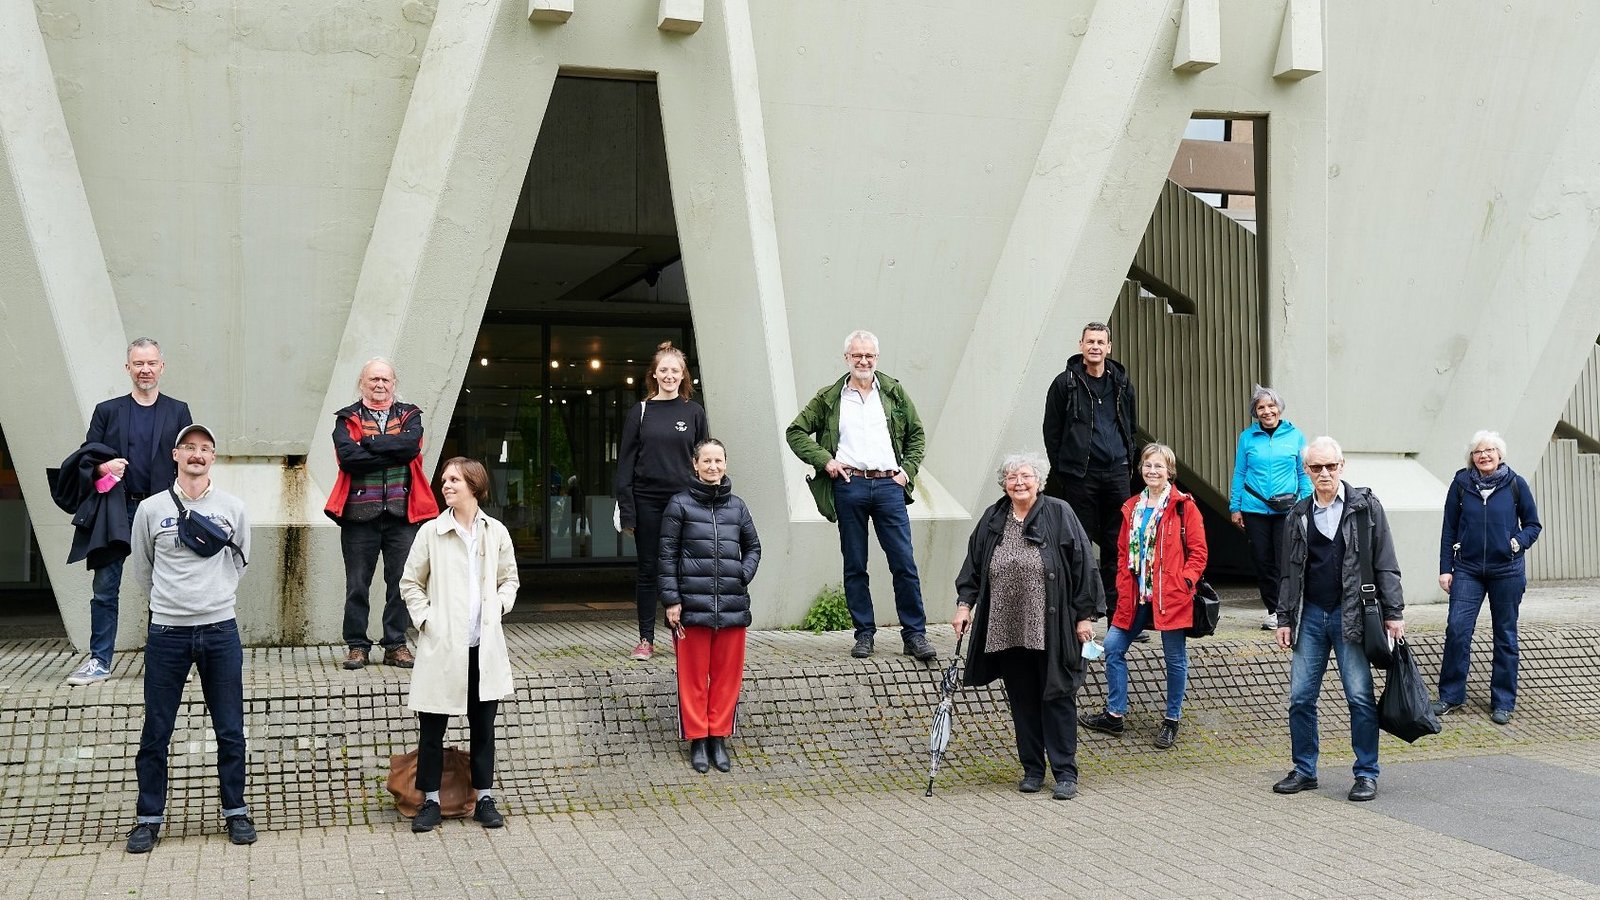 New Patrons' group in front of a building in Marl